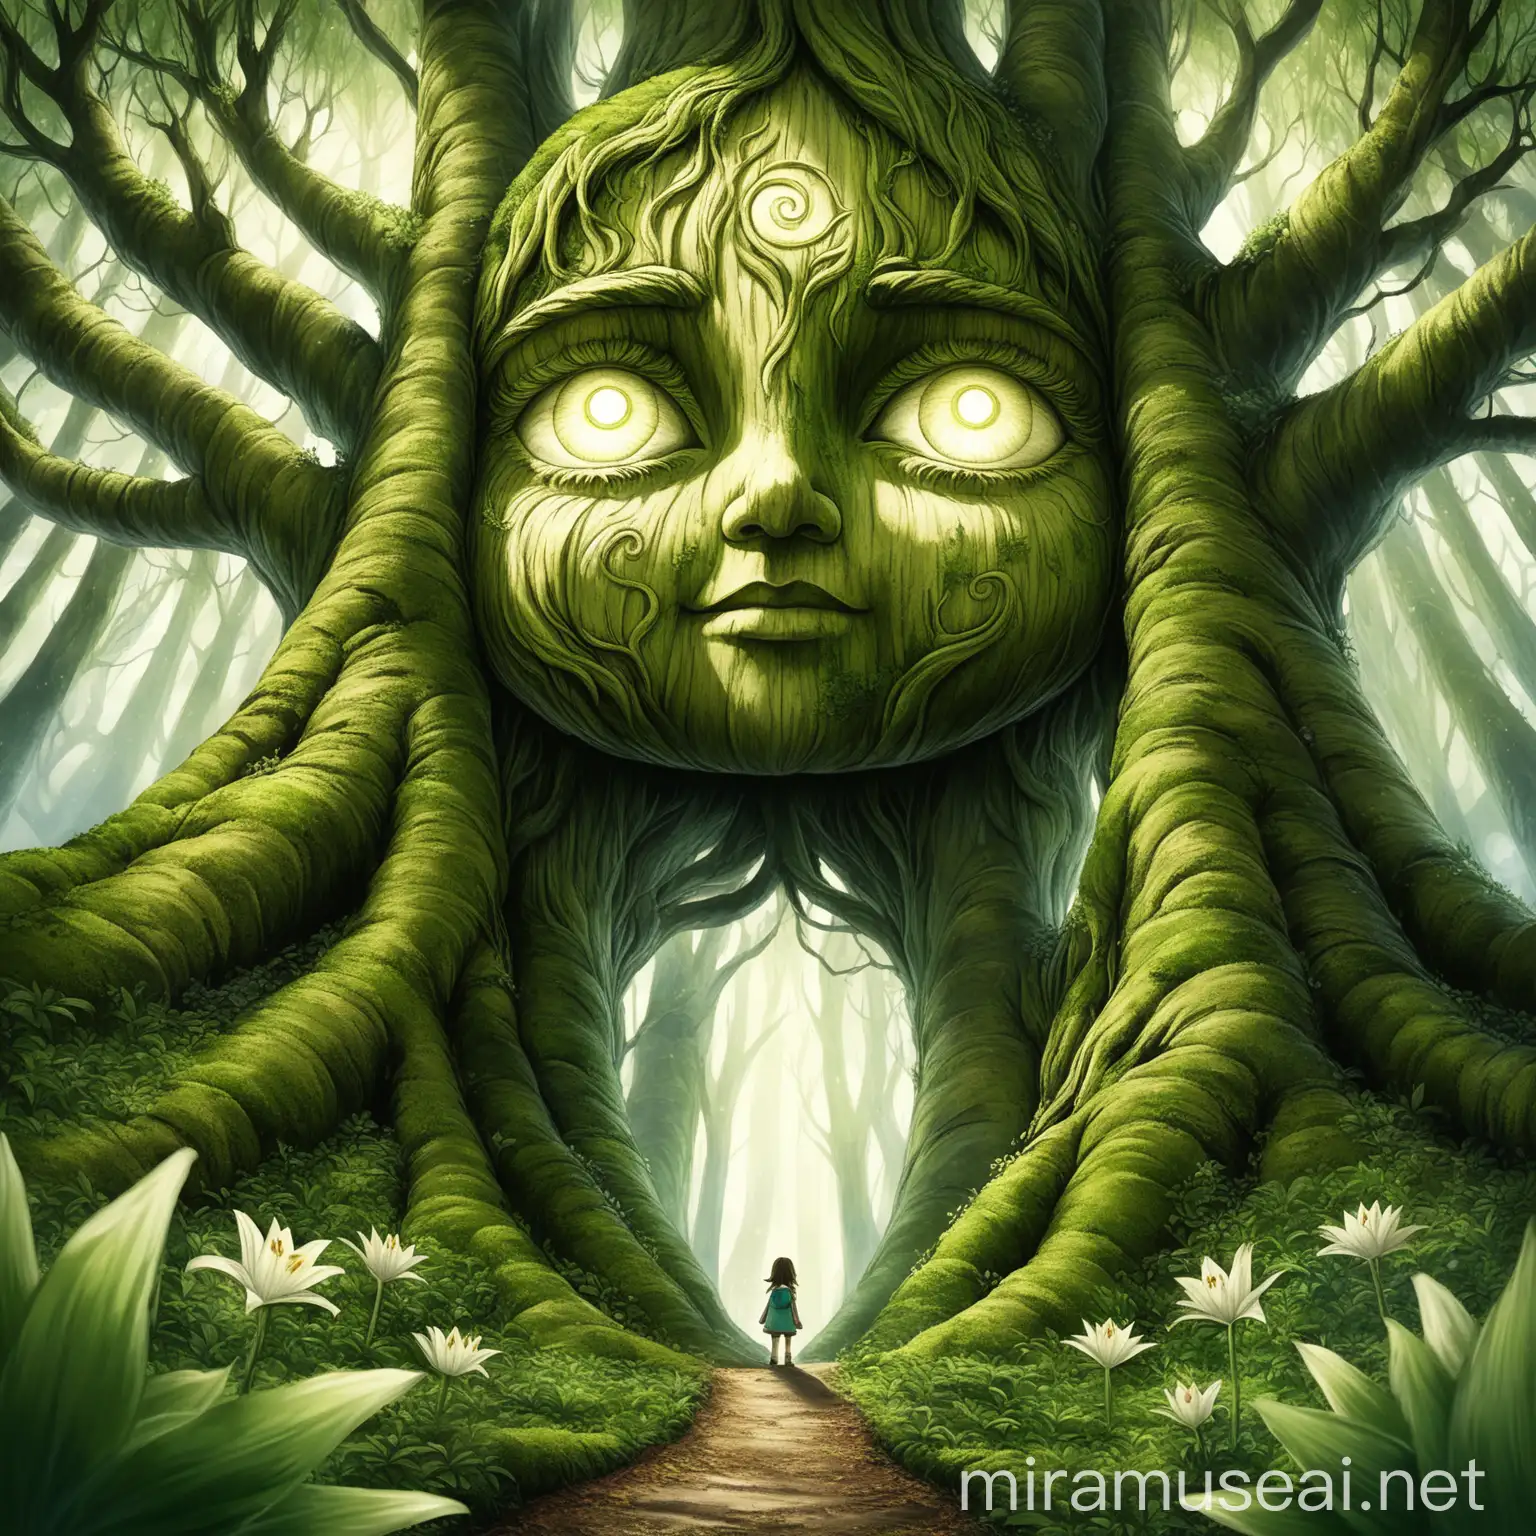 Suddenly, Lily saw it - a giant tree with a face carved from green moss and leaves. Wise eyes blinked at them. "Welcome, travellers," boomed a voice. "I am Luna the Wise. You seek the way home?"